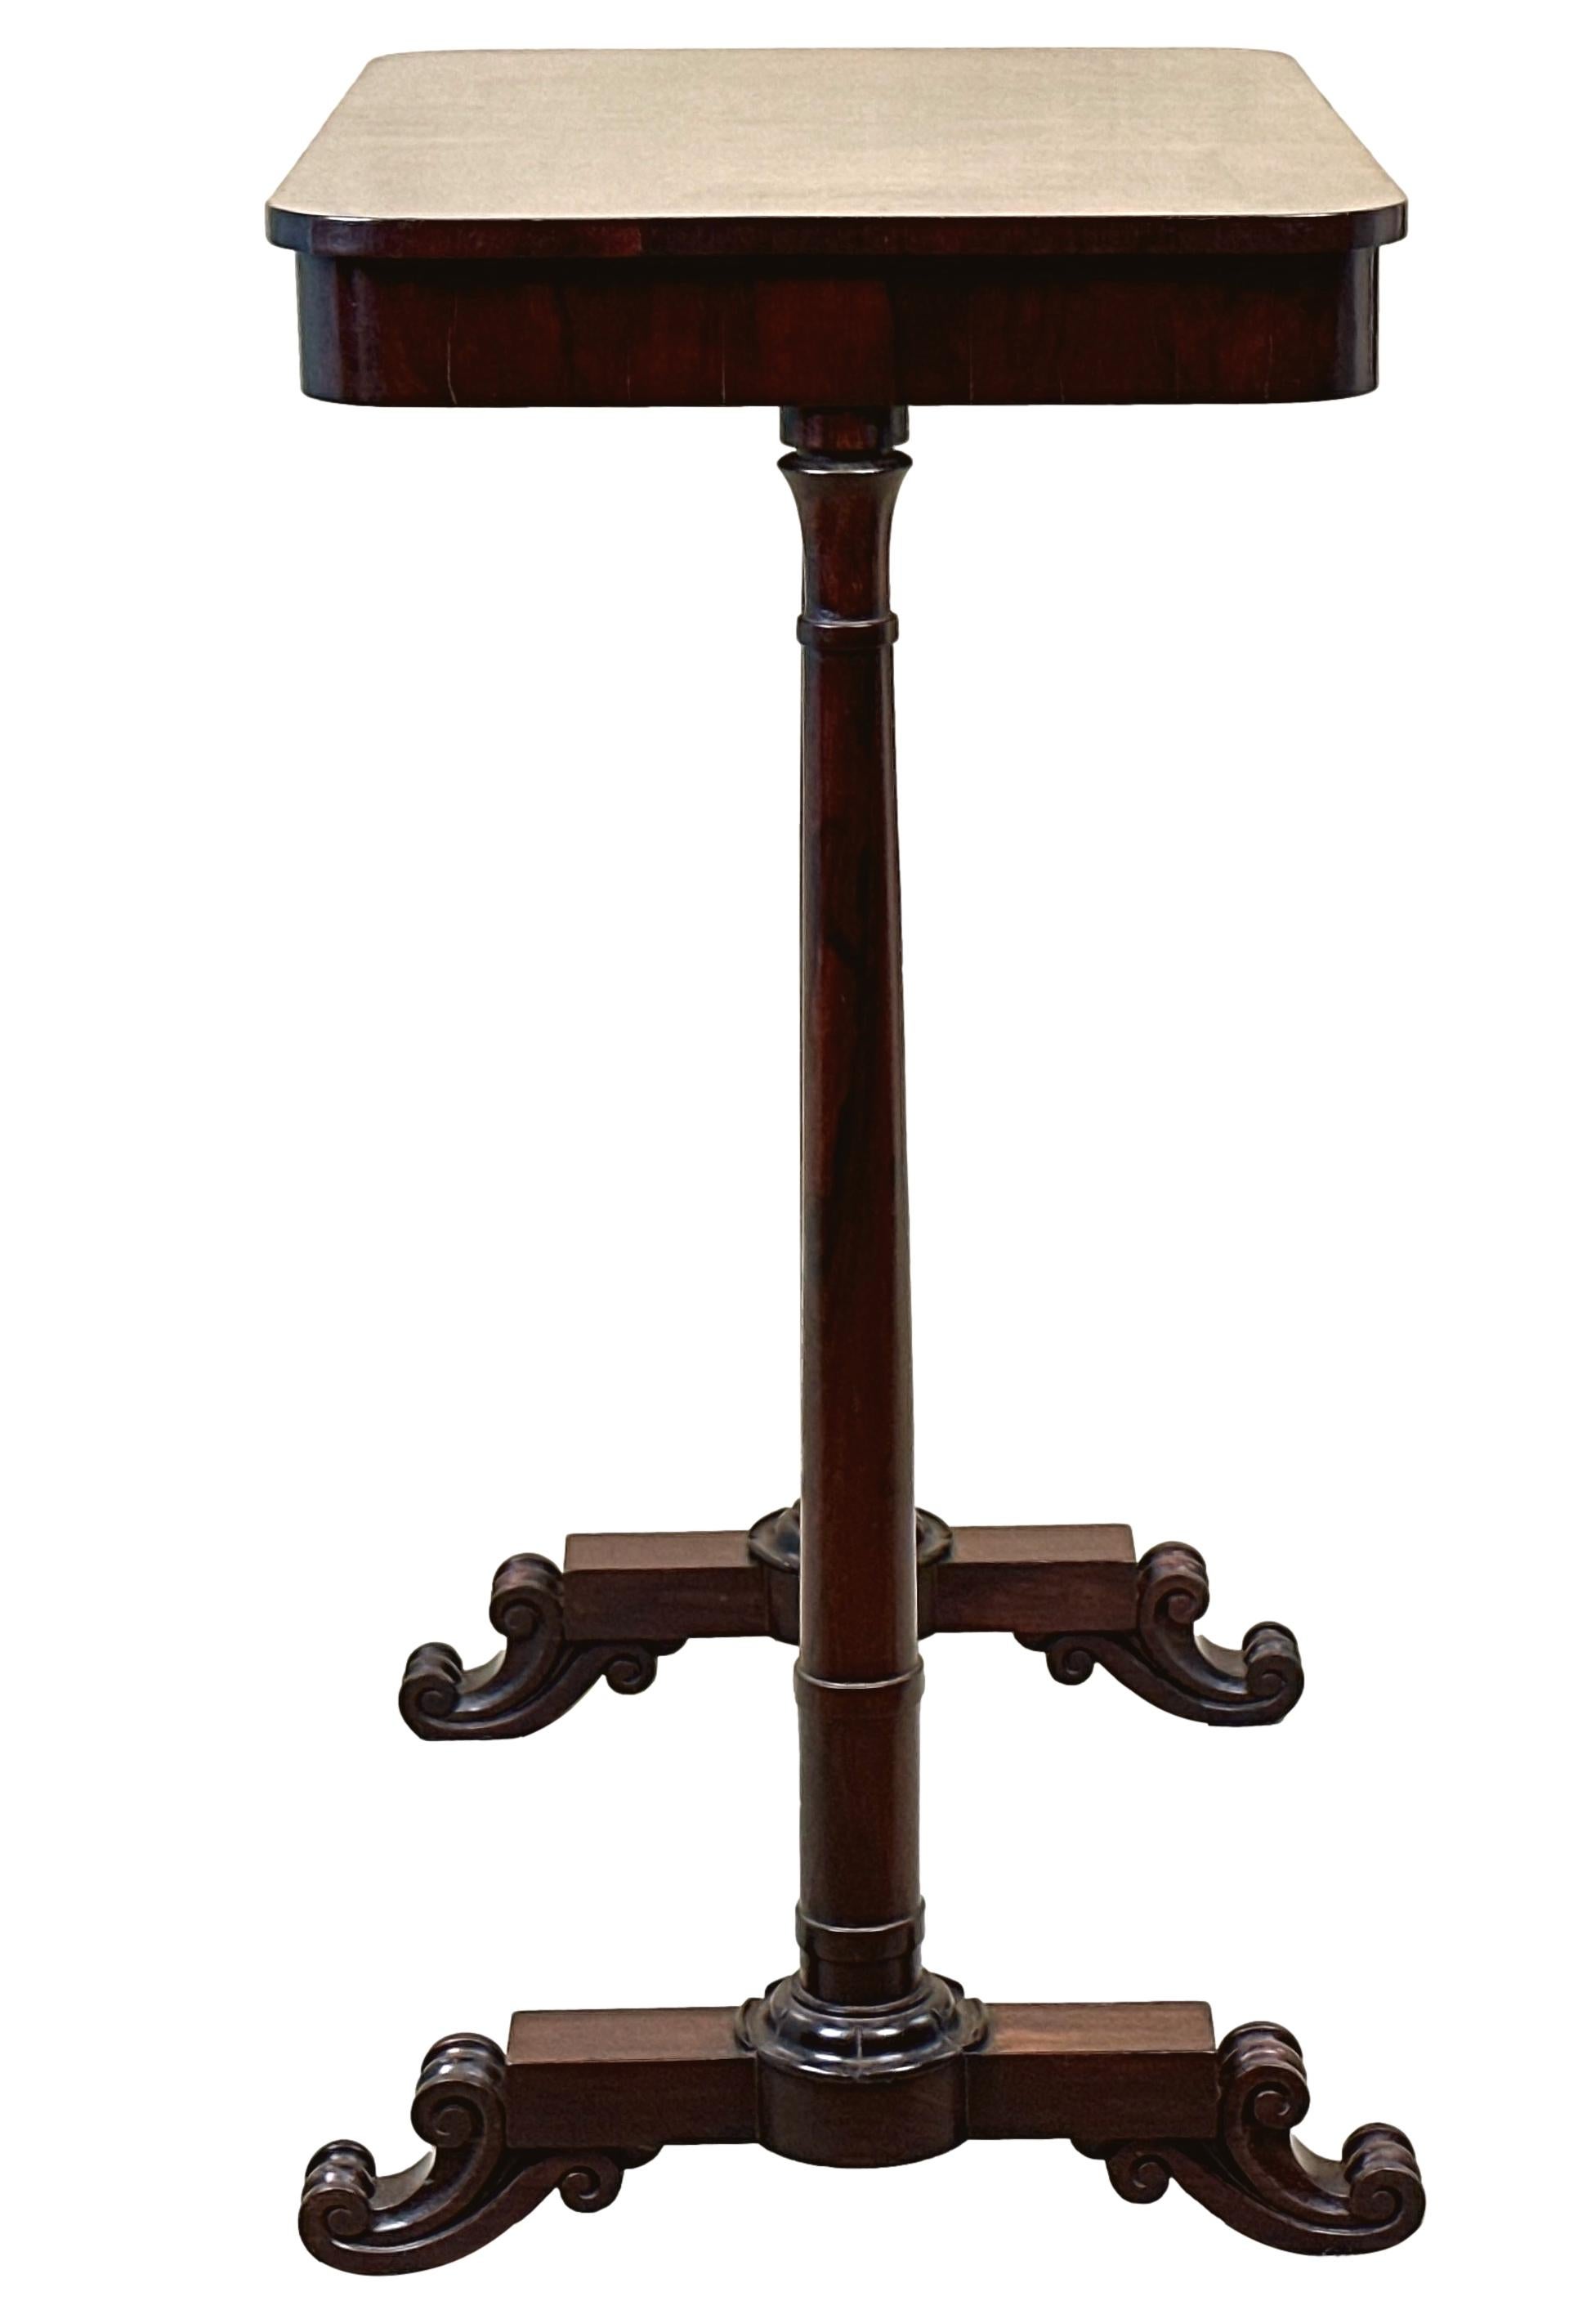 A Good Quality, 19th Century, Late Regency Period Rosewood Occasional Lamp Table Of Diminutive Proportions, Having Well Figured Rectangular Top Raised On Elegant Turned End Supports, With Attractive Stylised Carved Lotus Leaf Decoration And Carved